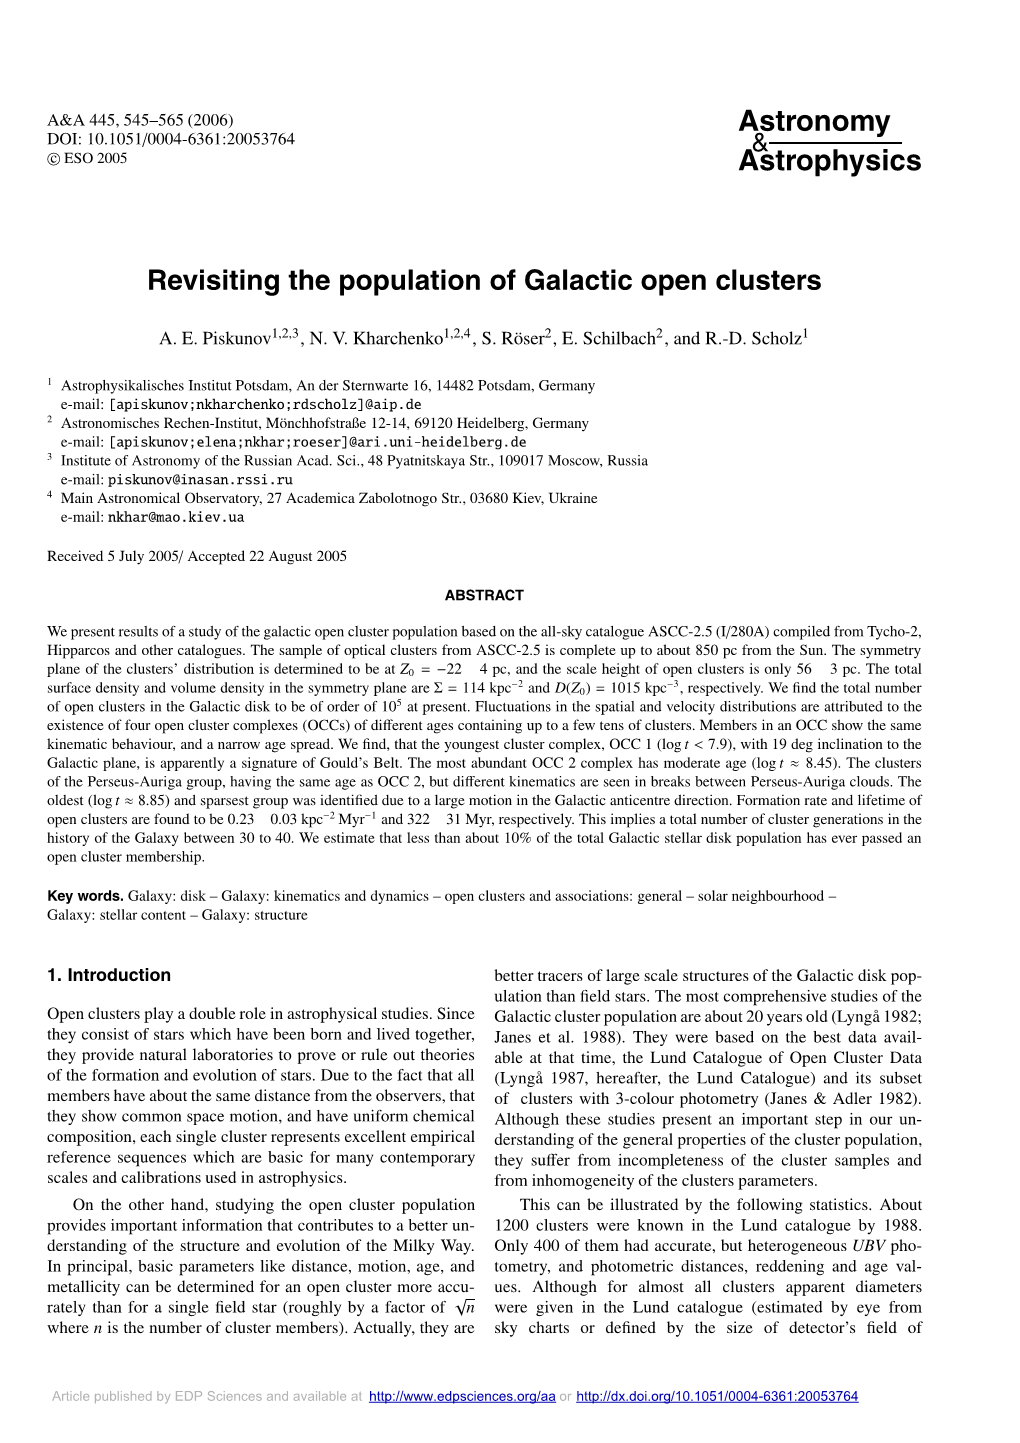 Revisiting the Population of Galactic Open Clusters